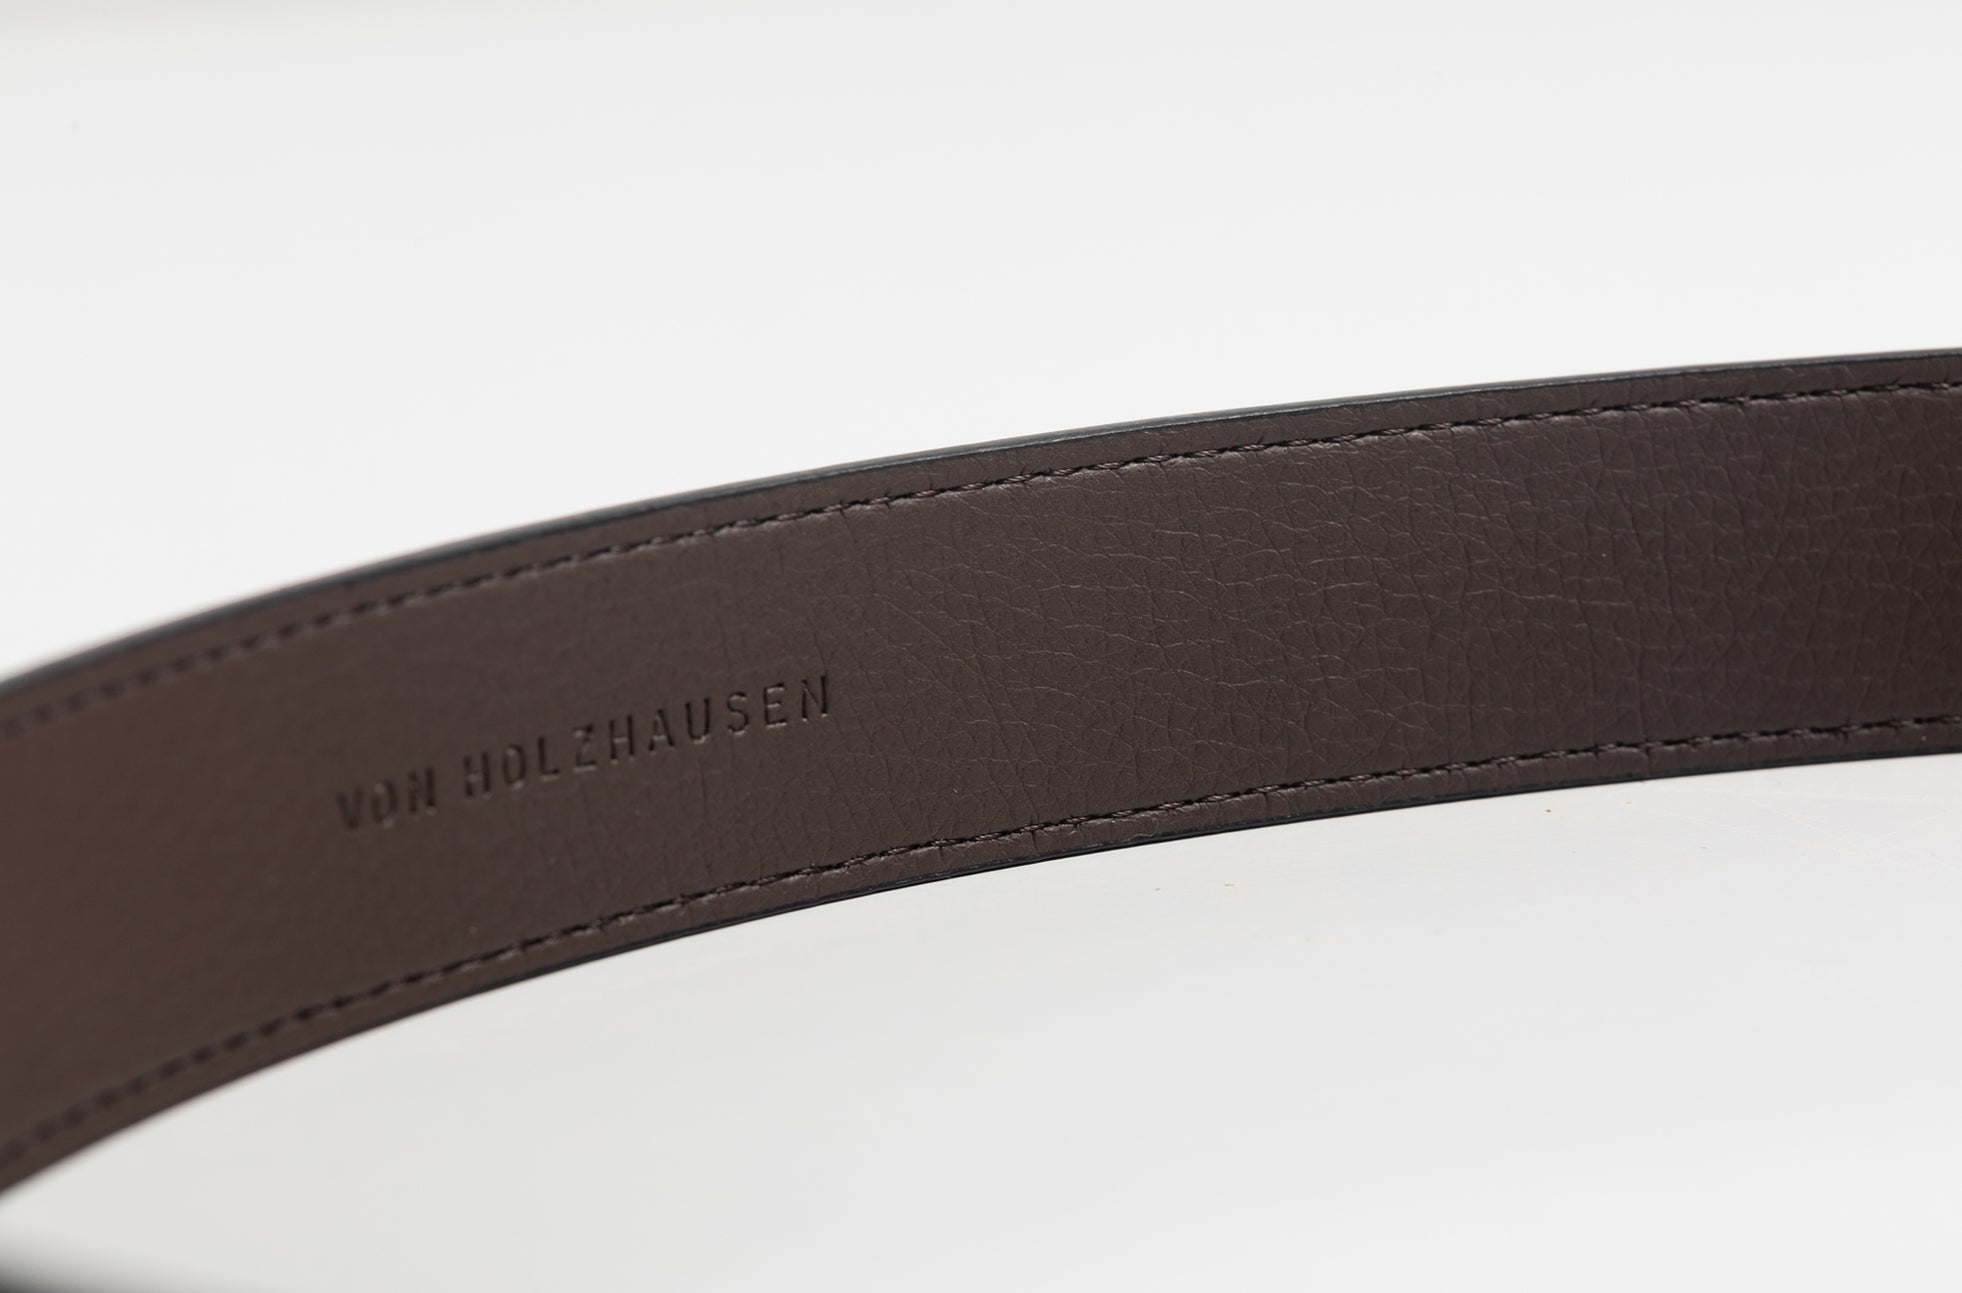 The Women's Belt in Technik-Leather in Taupe image 6